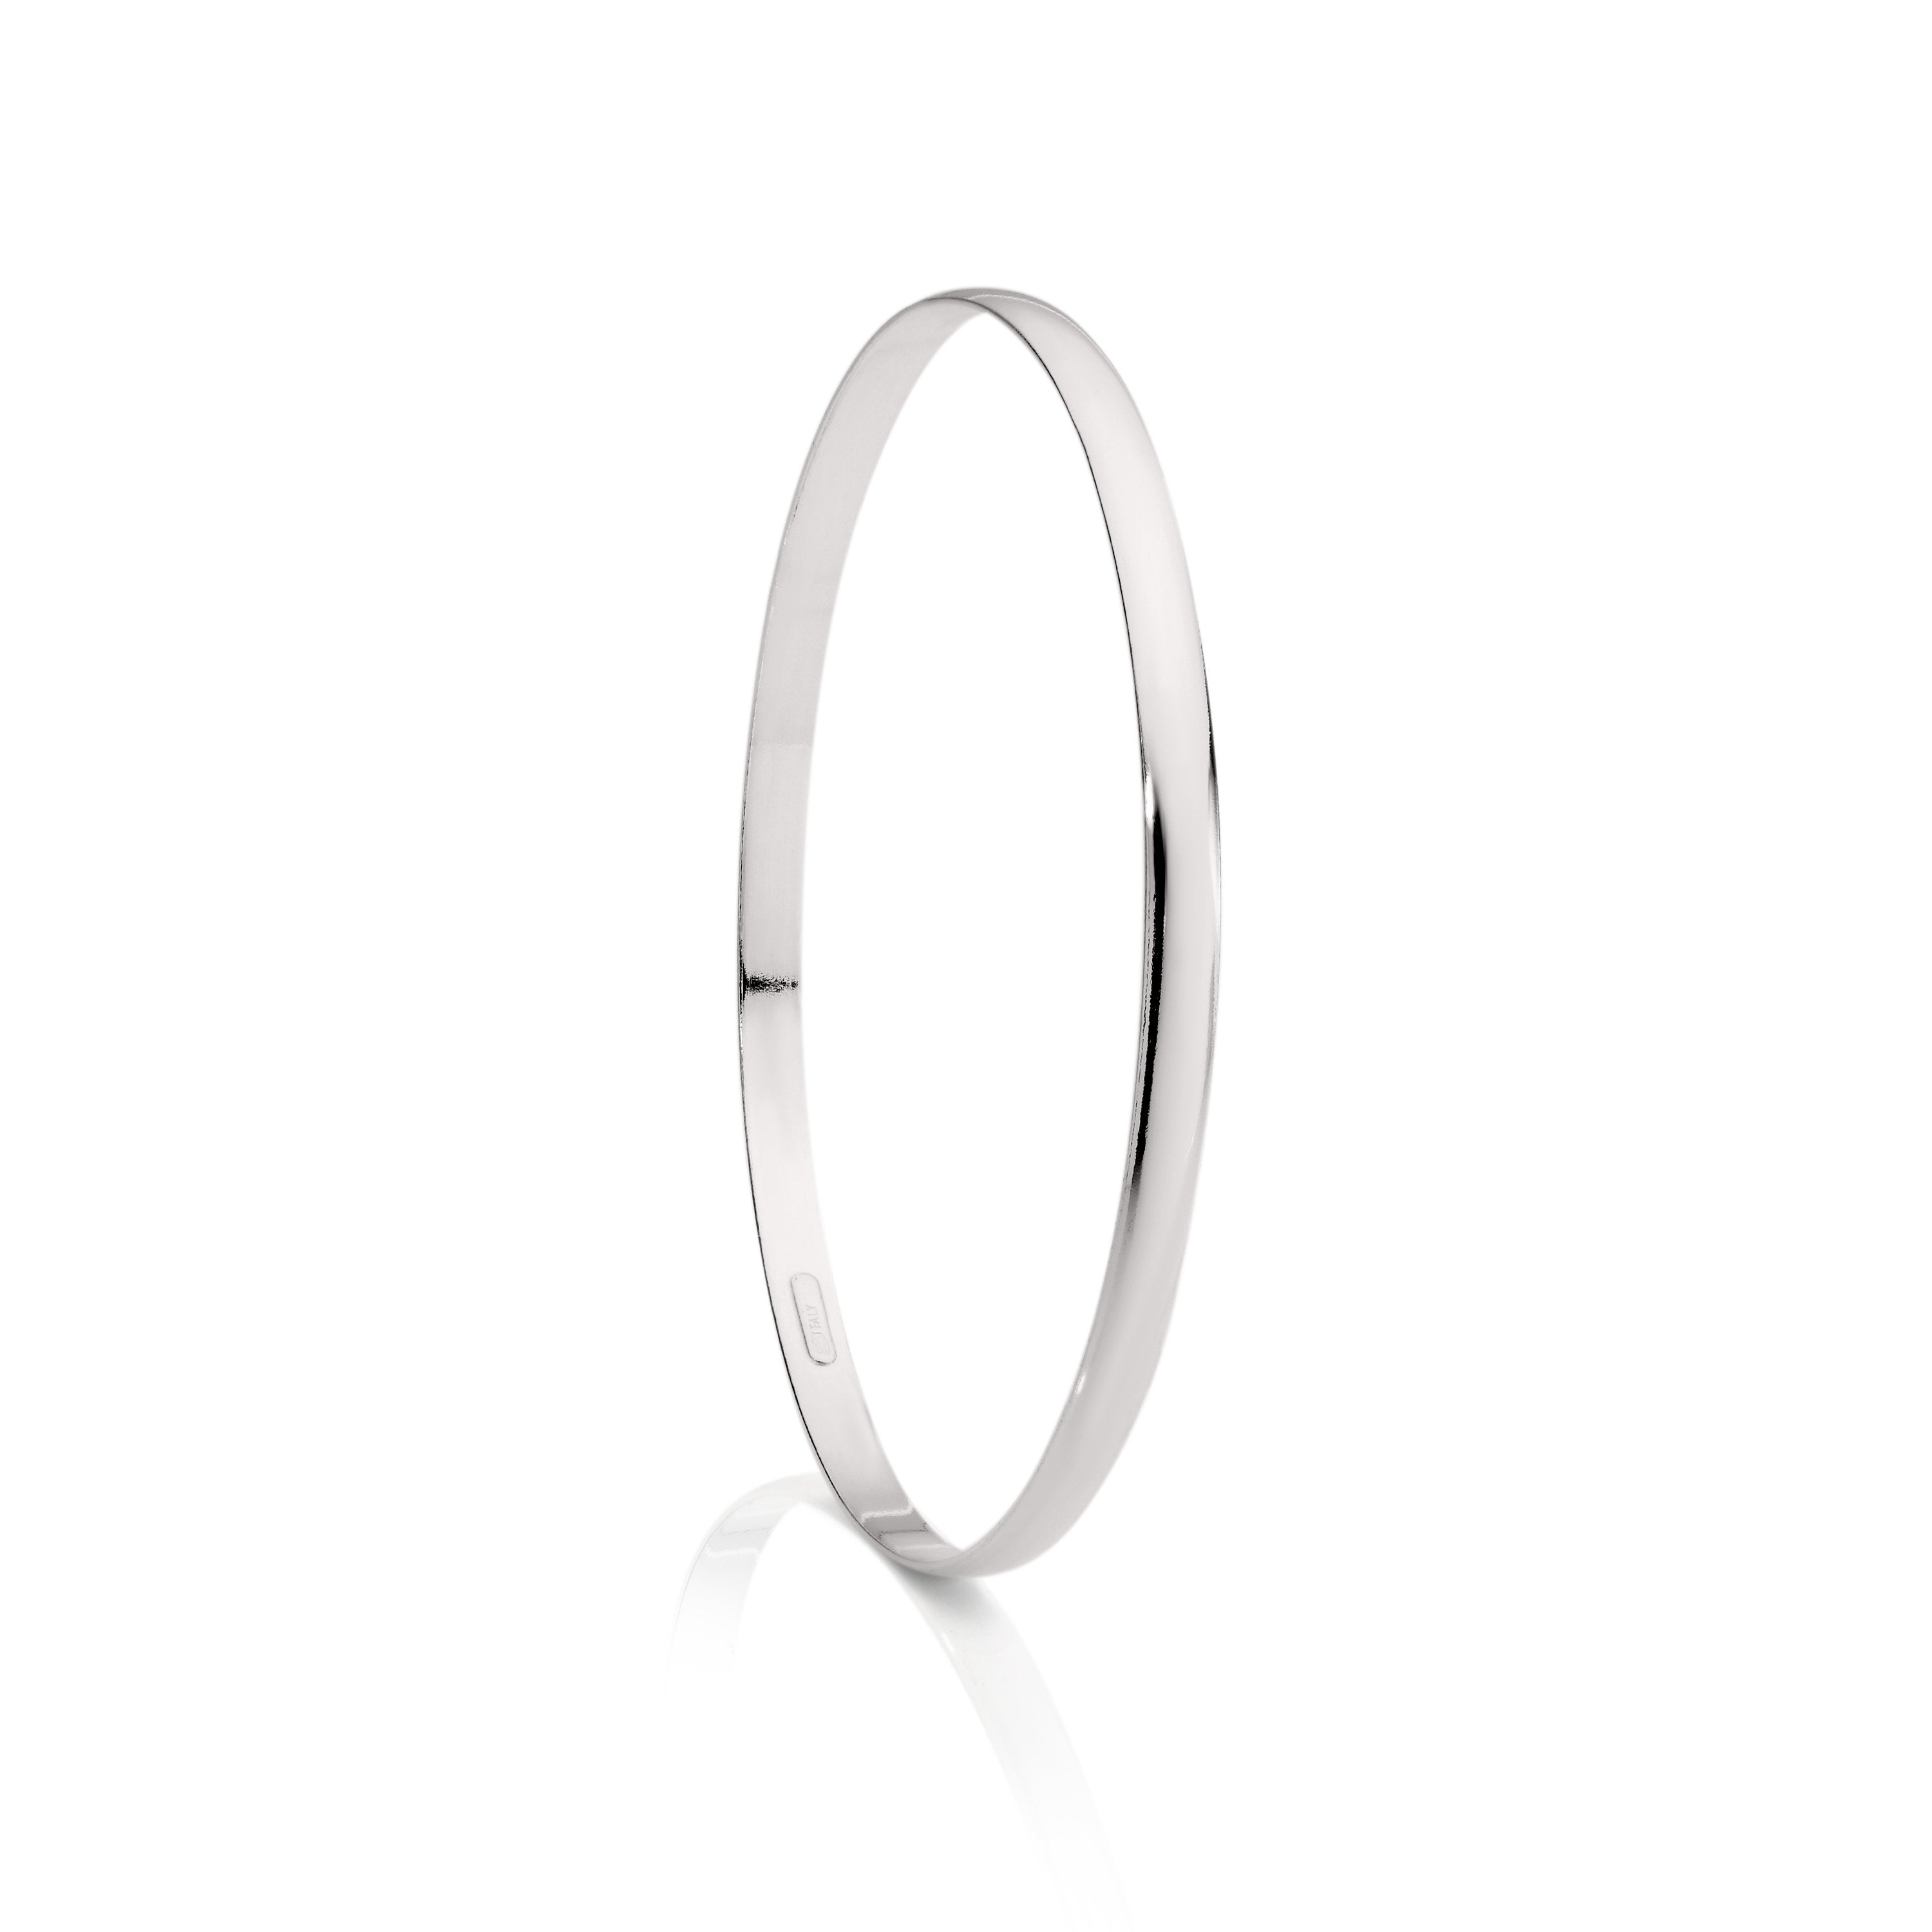 Silver 4mm solid bangle 70mm